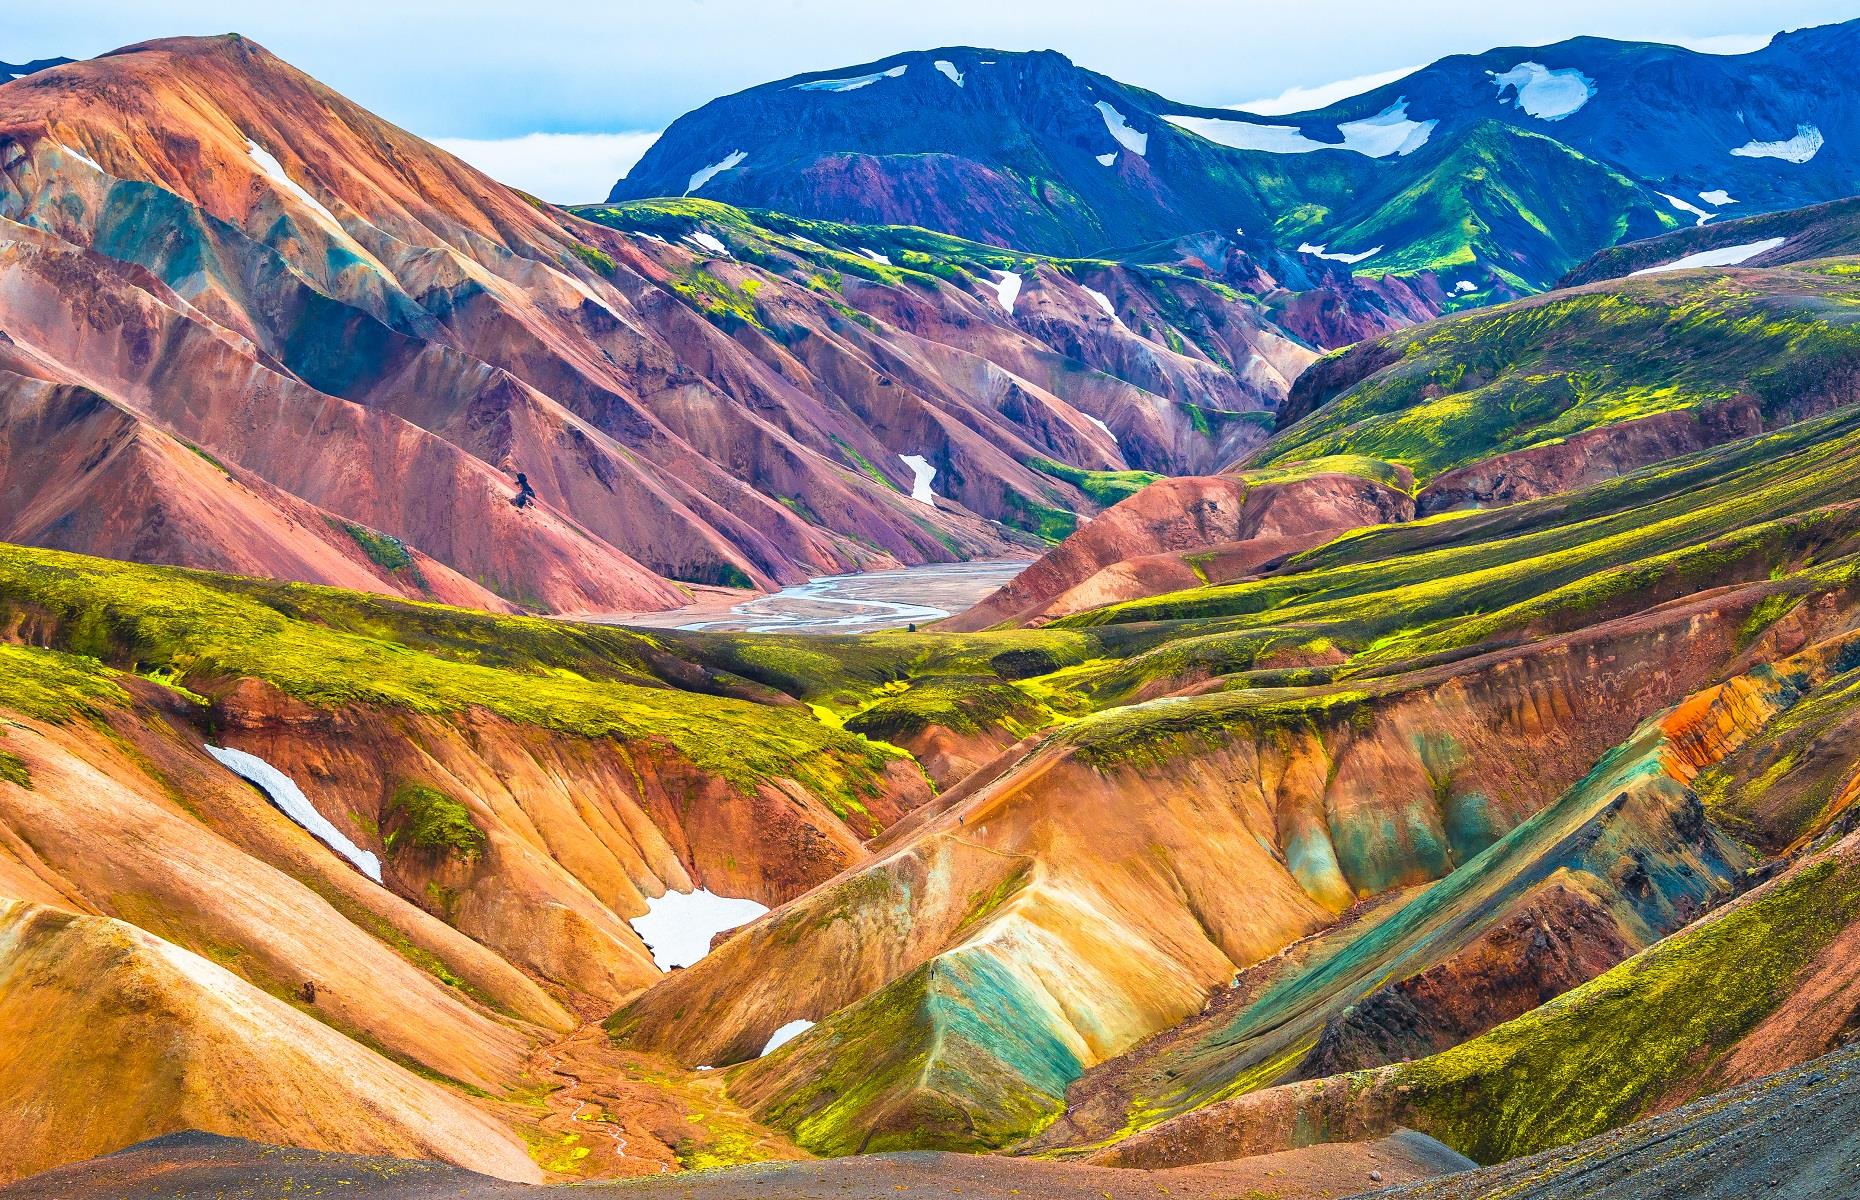 <p>Decorated with color, as if painted by hand, Landmannalaugar is an awe-inspiring place to while away a few hours. Located inside Fjallabak Nature Reserve, on the edge of the Laugahraun lava field, this vivid landscape was formed during a volcanic eruption in around 1477. As well as its candy-colored rhyolite mountains, that really have to be seen to be believed, the rugged valley in the southern highlands has geothermal springs and azure rivers.</p>  <p><a href="https://www.loveexploring.com/galleries/95345/rainbow-world-amazing-images-of-earths-most-colourful-natural-wonders?page=1"><strong>See more of Earth's most colorful natural wonders</strong></a></p>